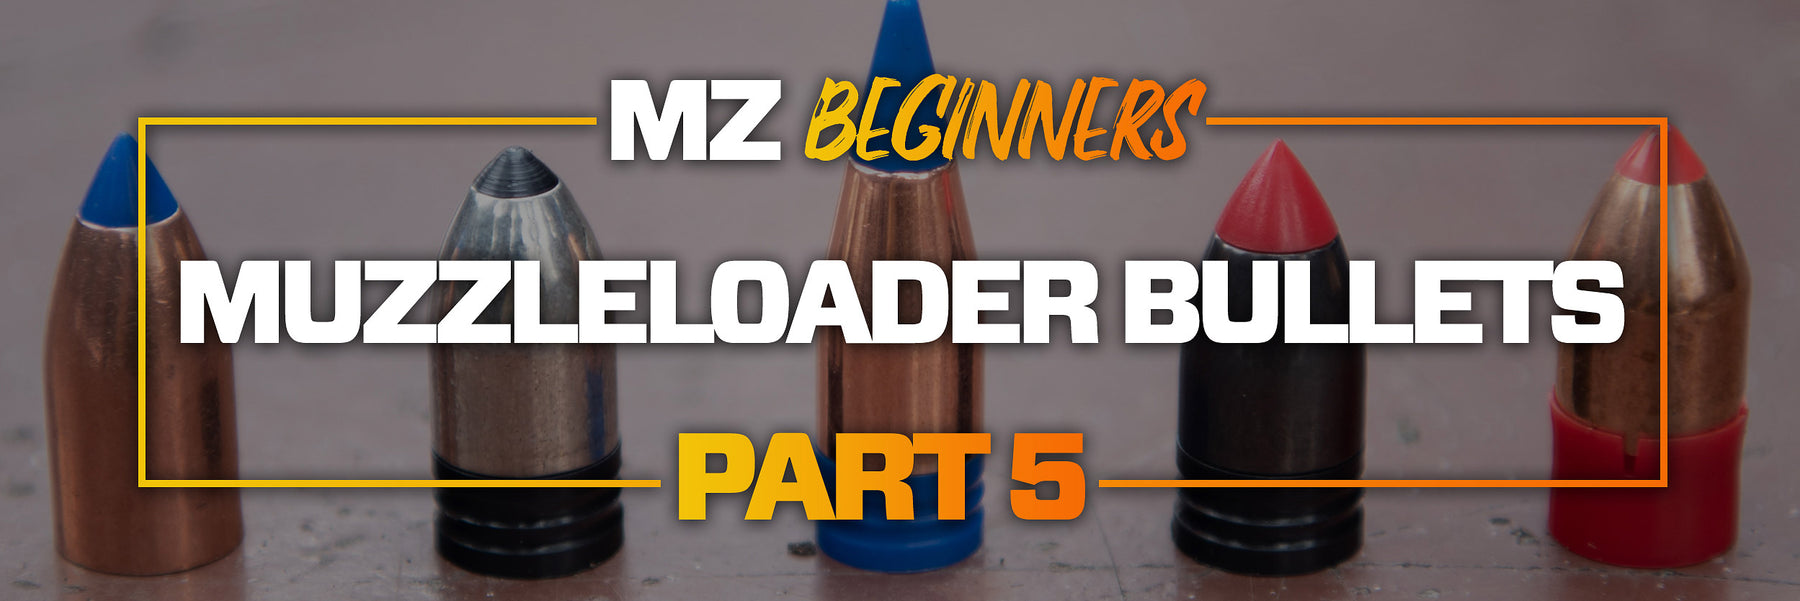 All About Bullets - The Beginners Guide To Muzzleloading - Part 5